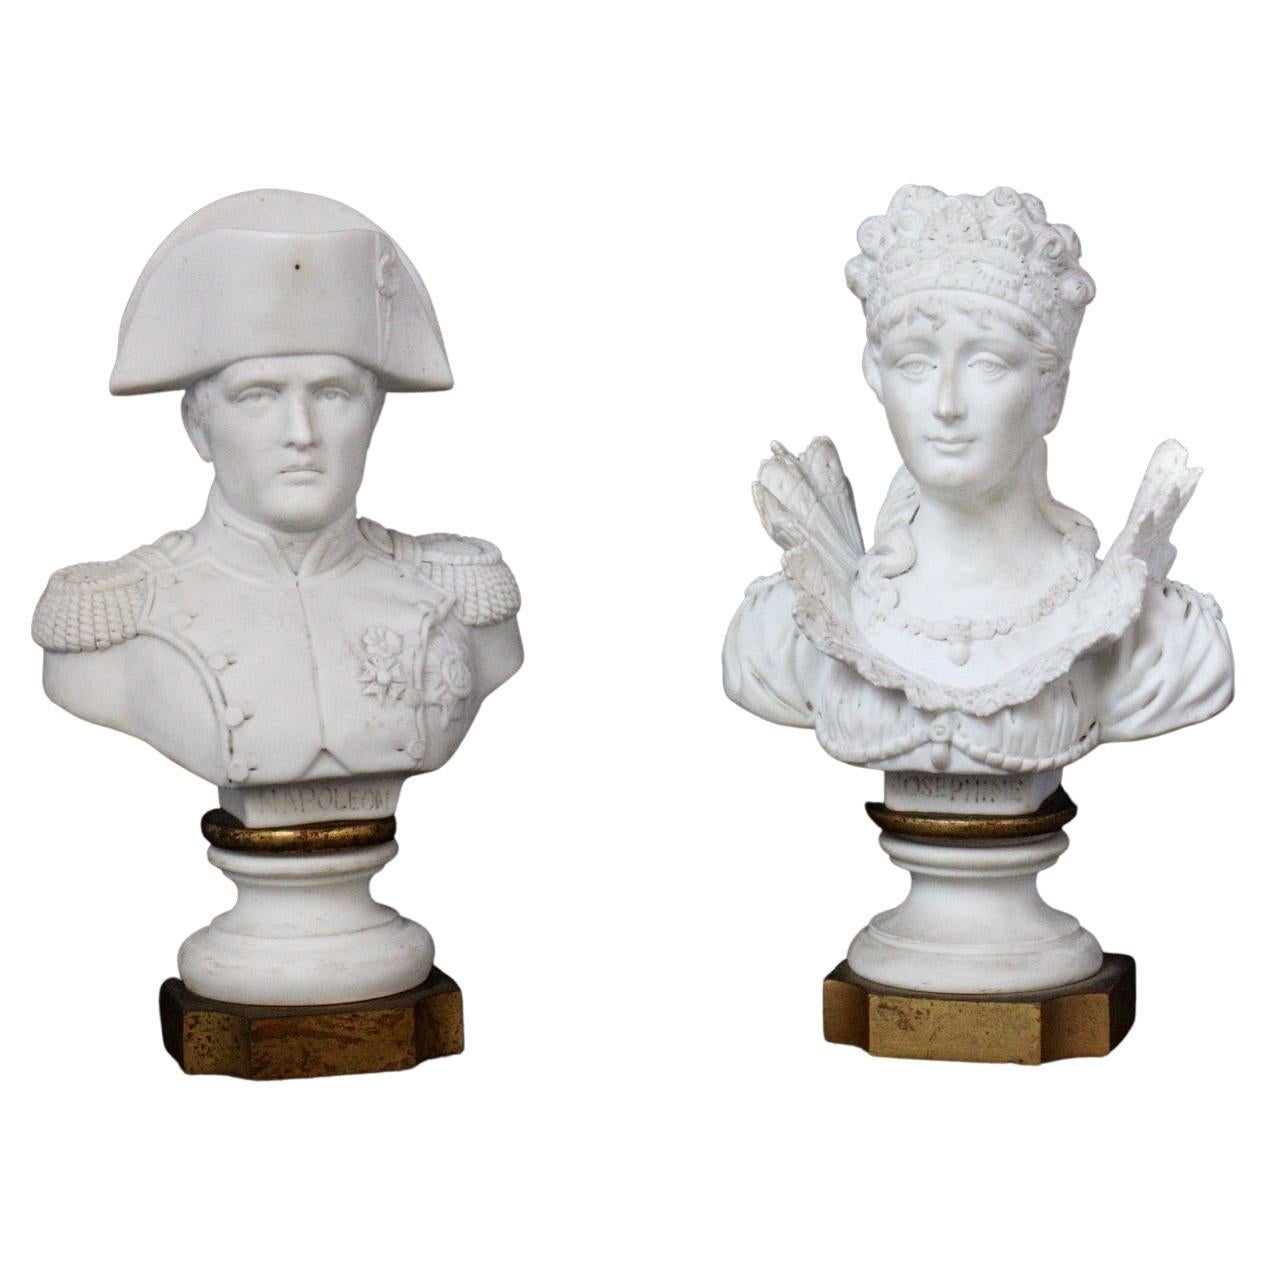 "Napoléon and Joséphine" a French 19th Century Sèvres Biscuit Pair of Busts